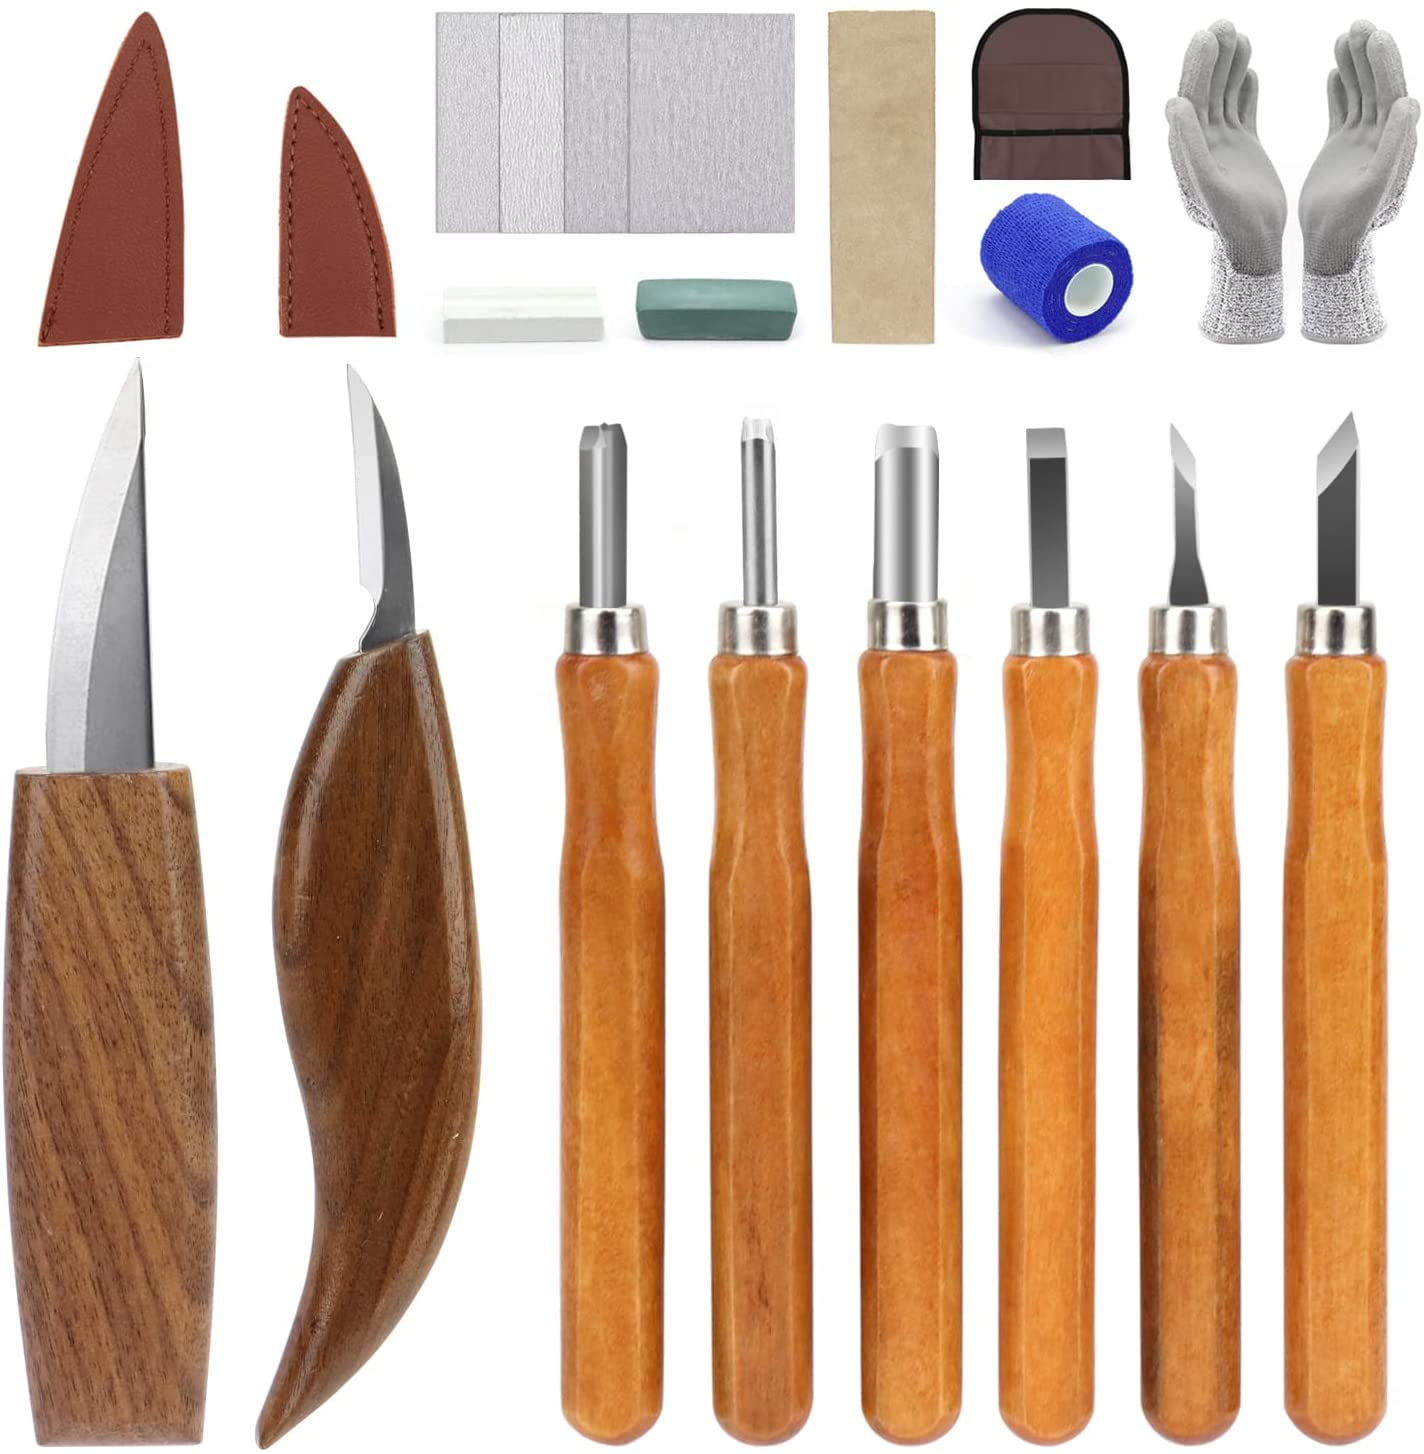 Olerqzer Wood Carving Tools for Beginners, 12-in-1 Wood Carving Kit with  Carving Hook Knife, Whittling Knife, Chip Carving Knife, Gloves, Carving